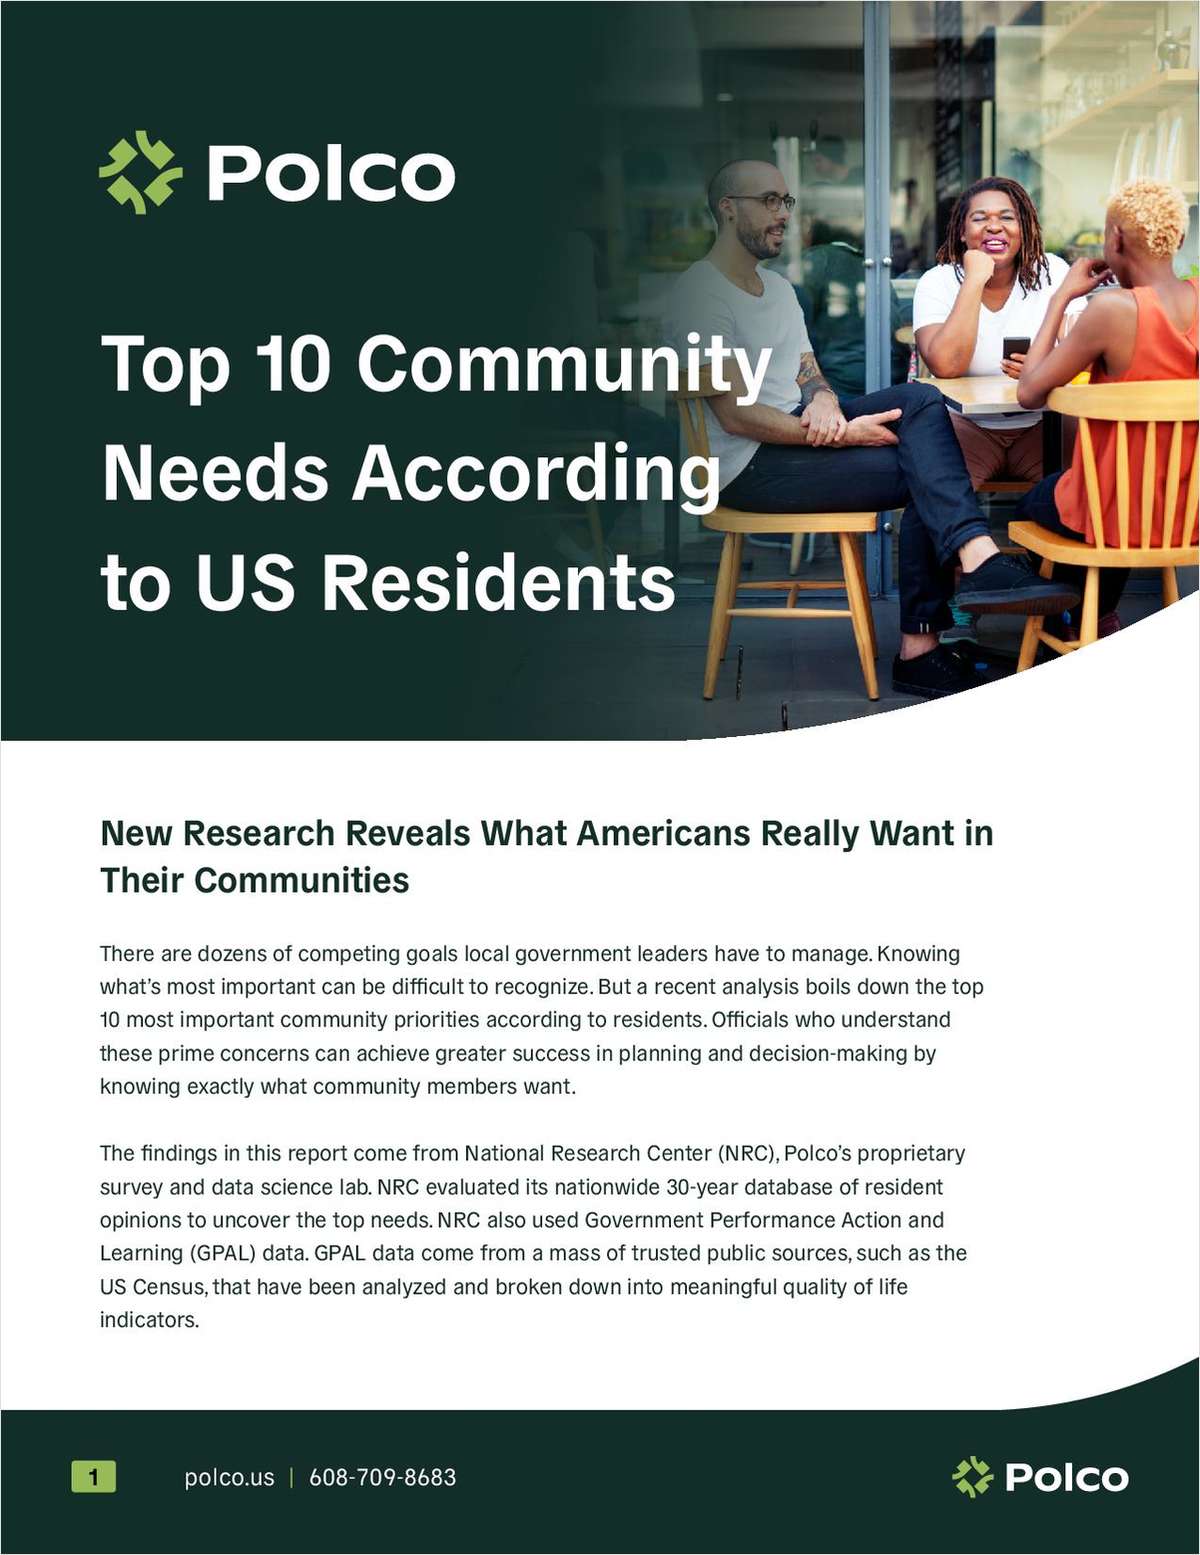 The Top 10 Community Needs According to US Residents